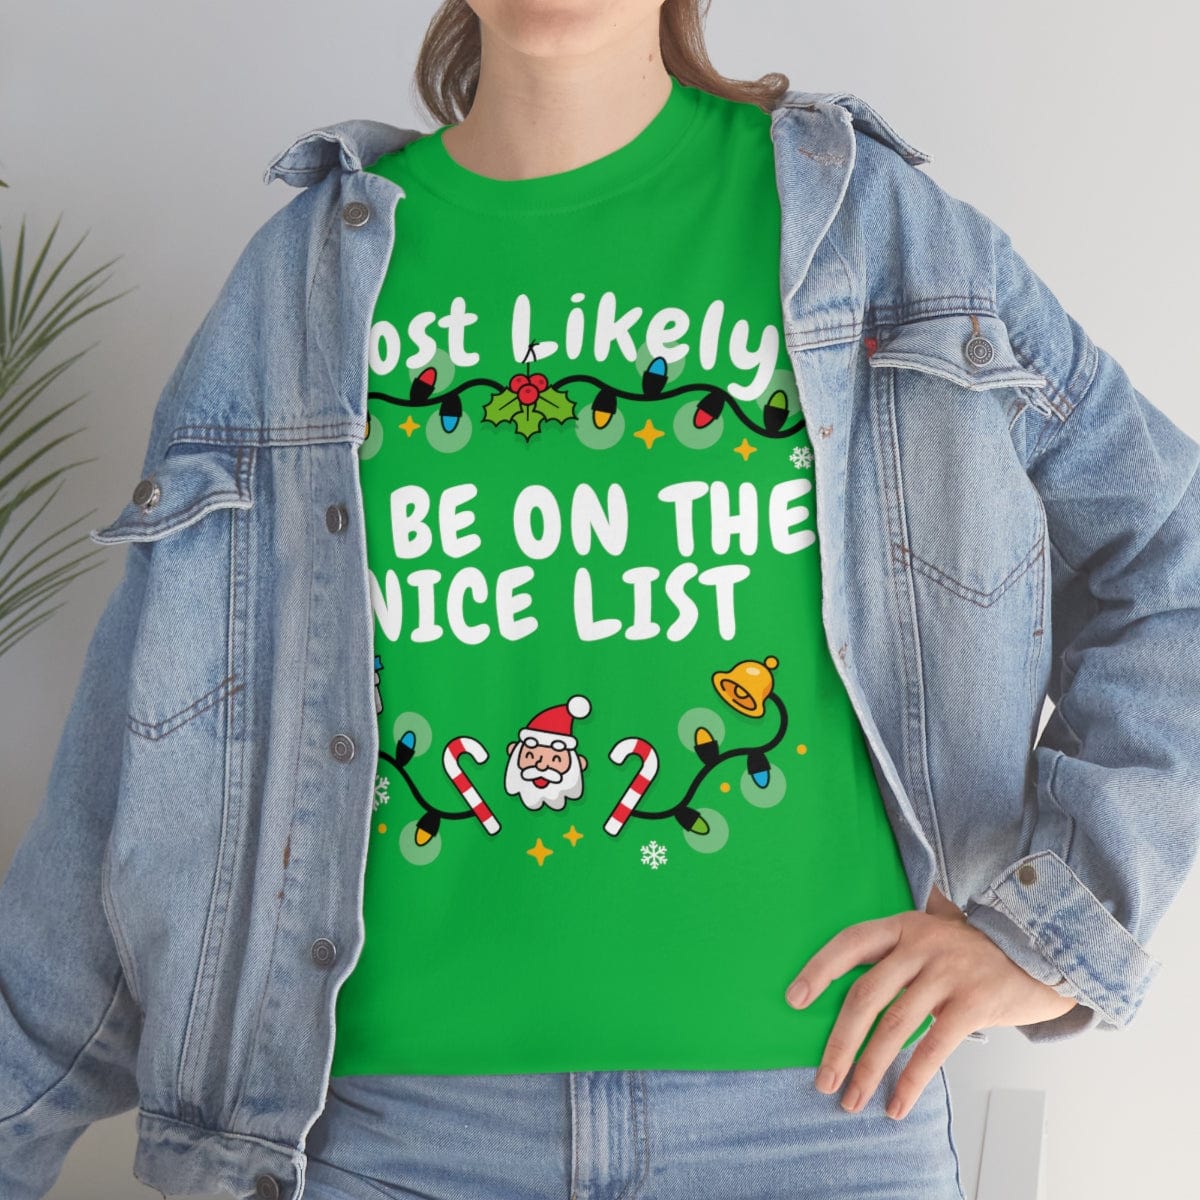 TO BE ON THE NICE LIST